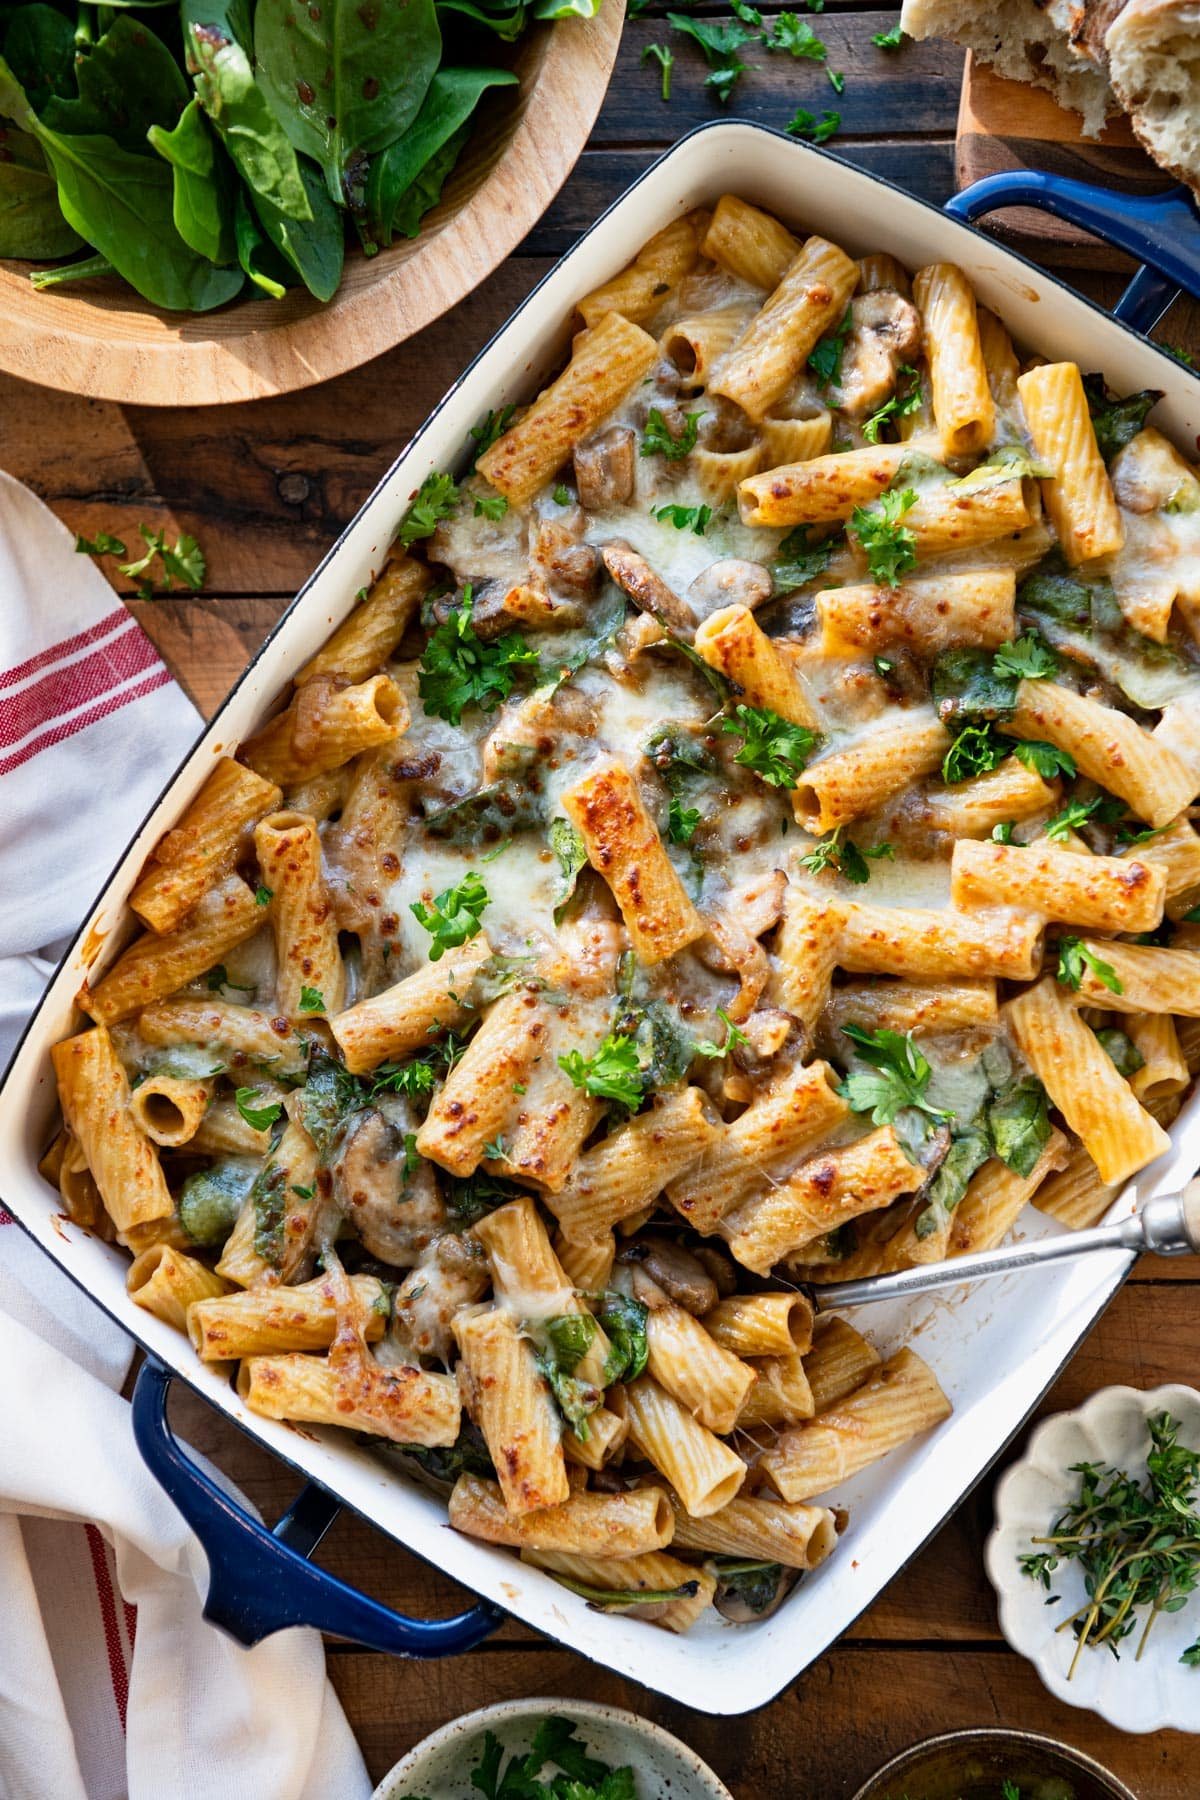 French onion pasta bake on a table with a side salad and bread.